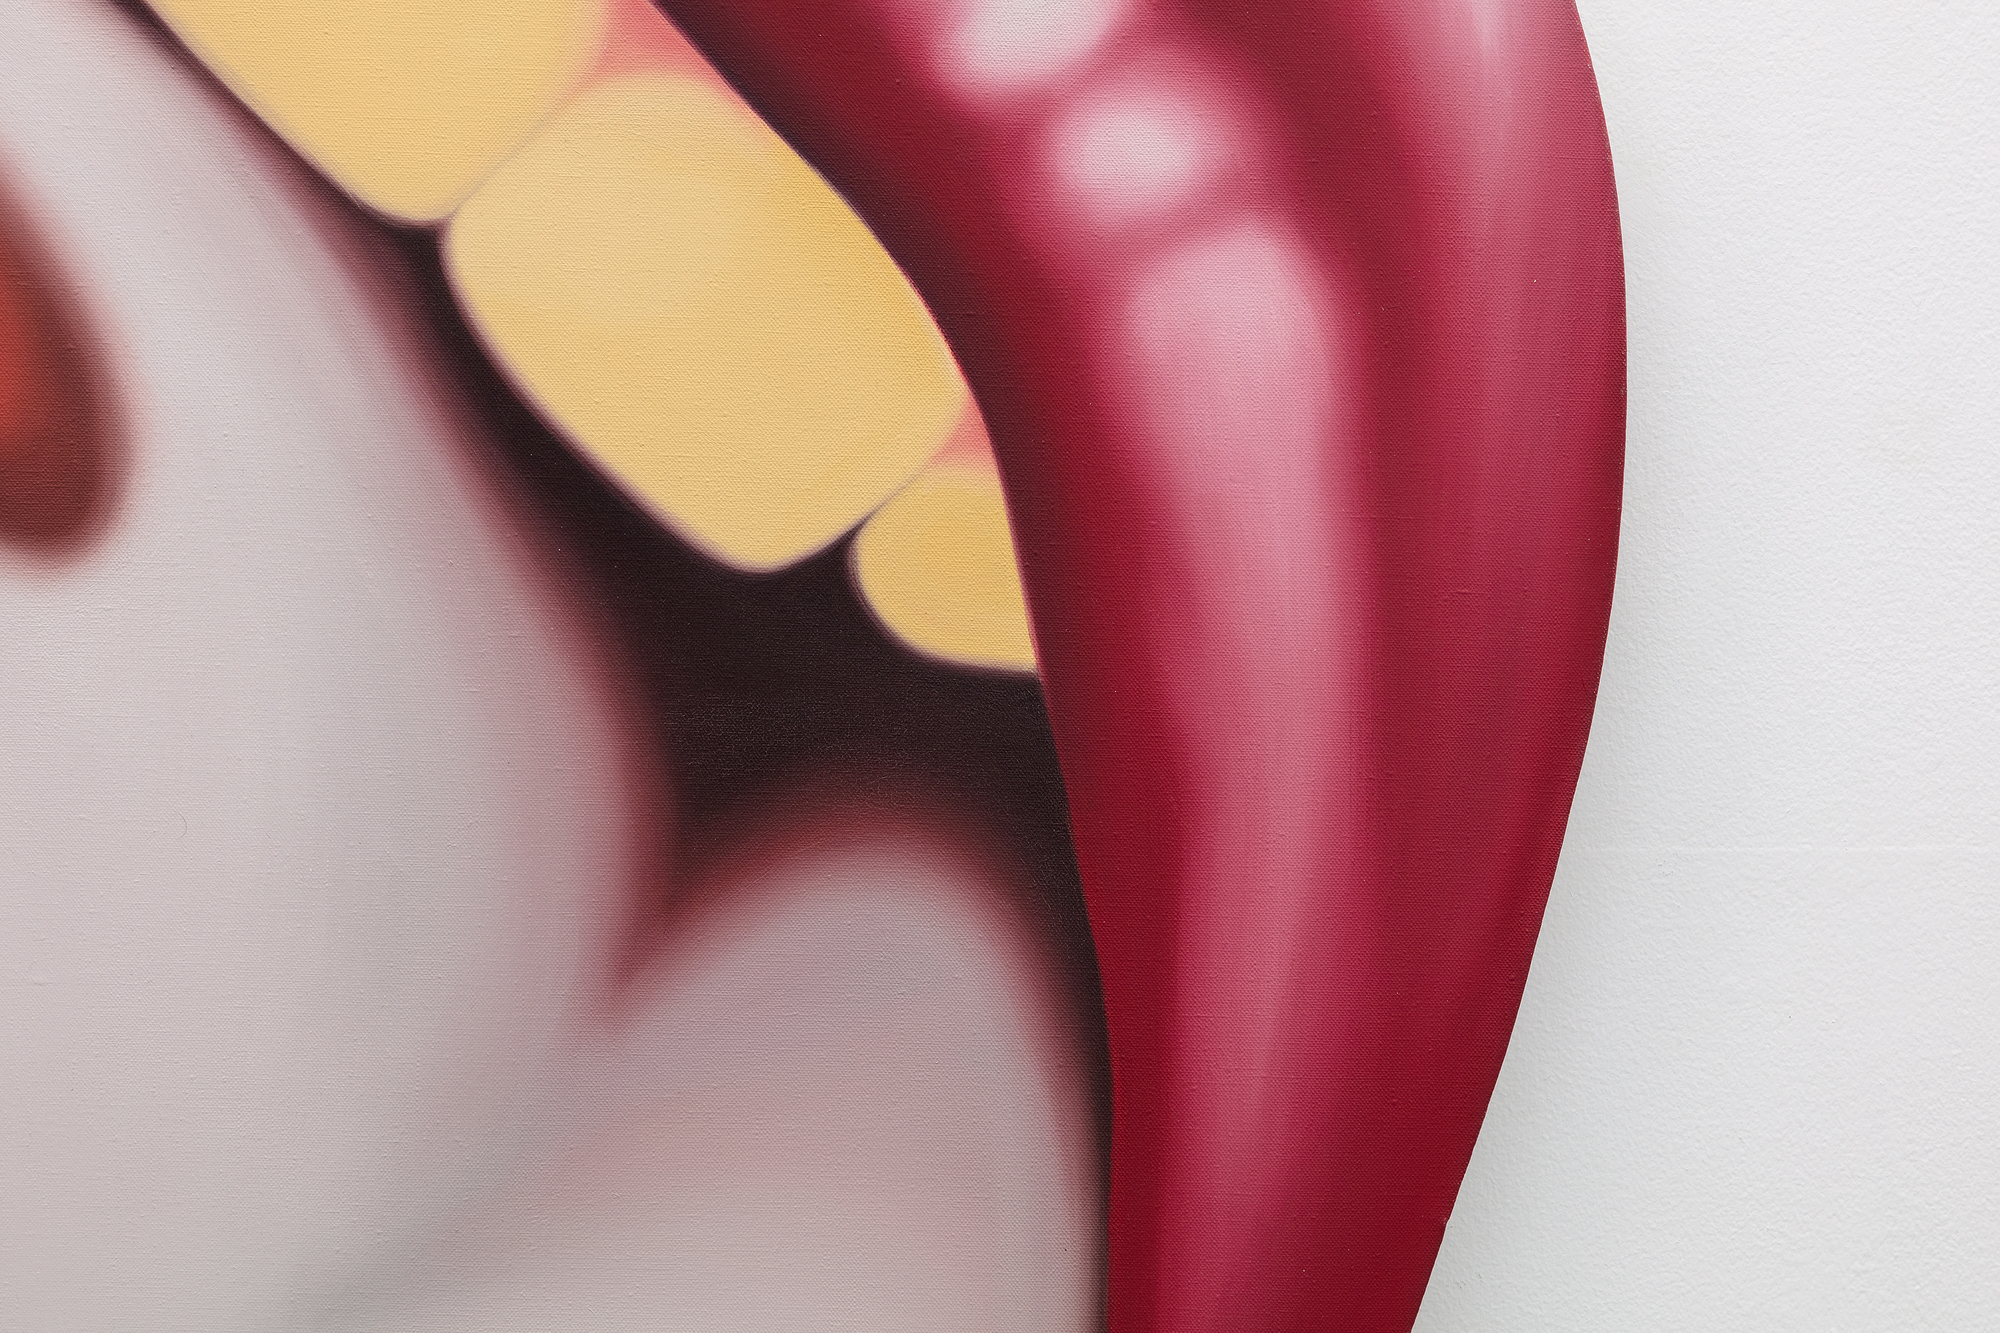 TOM WESSELMANN - Smoker No. 21 - oil on shaped canvas - 74 1/2 x 67 1/2 in.